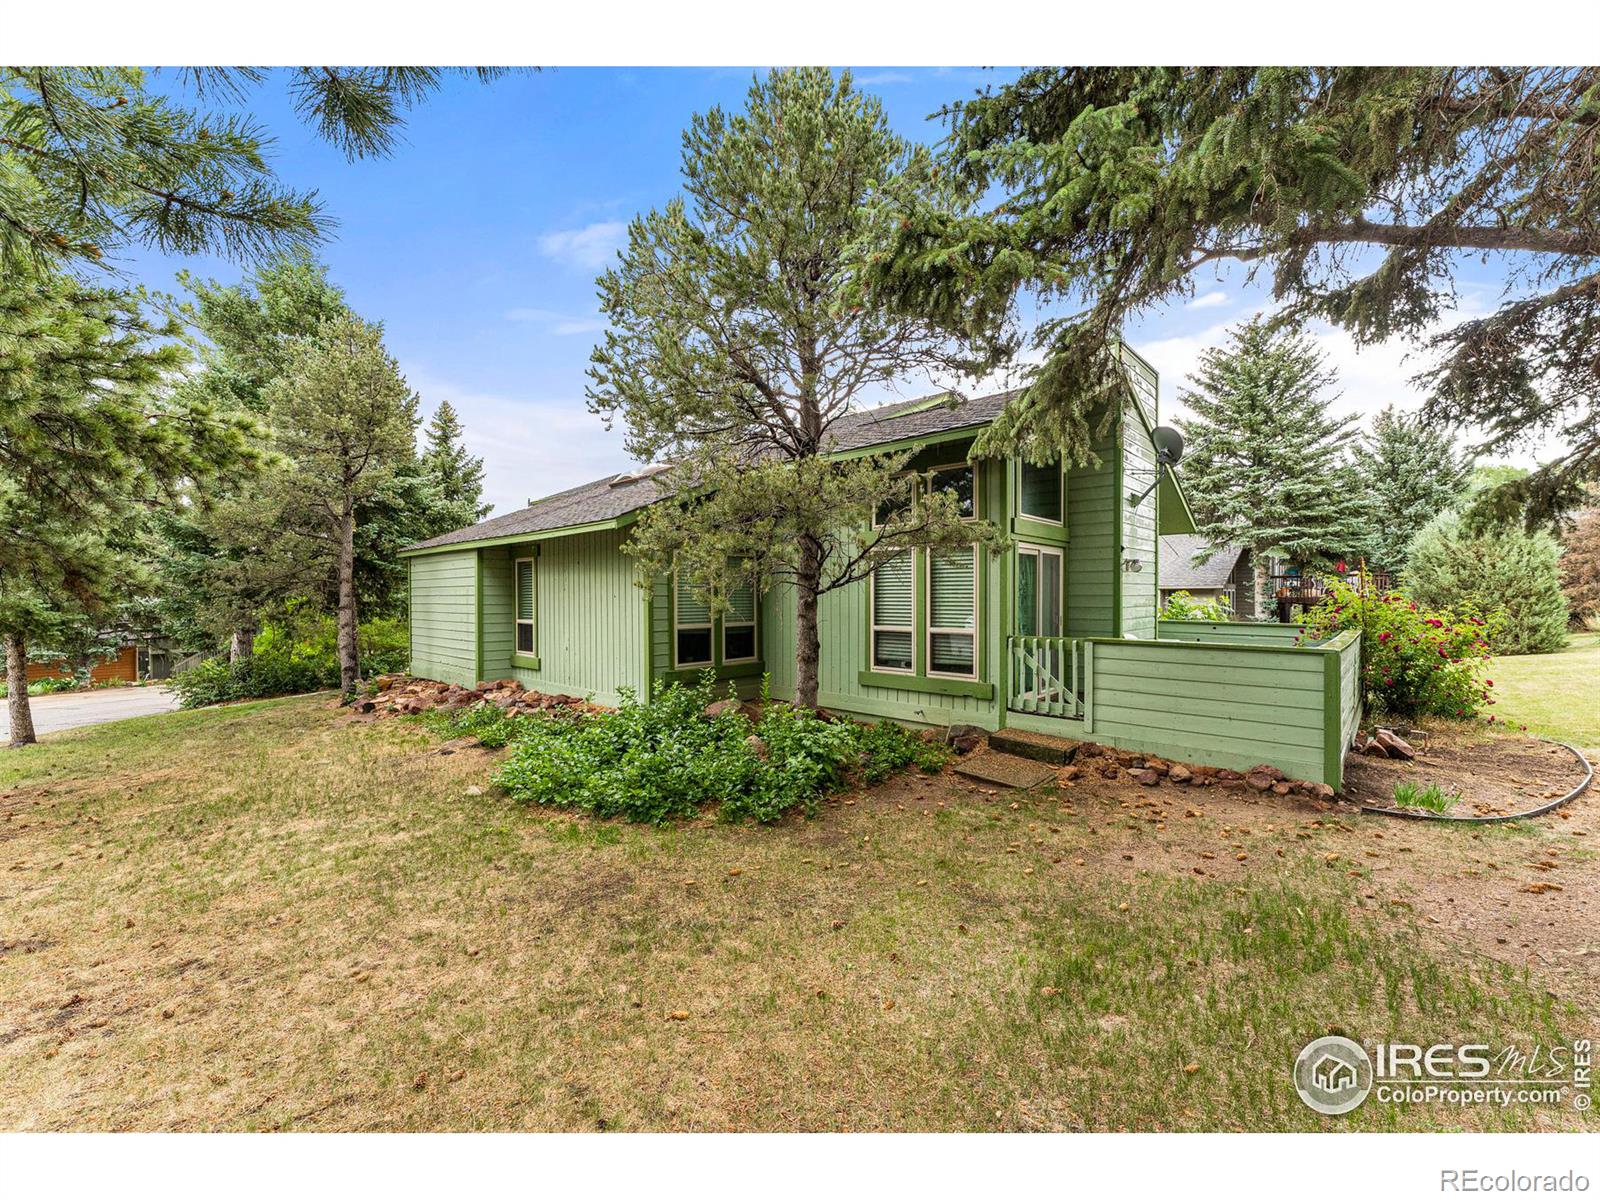 2202  Stony Hill Road, boulder MLS: 4567891002681 Beds: 3 Baths: 3 Price: $1,495,000